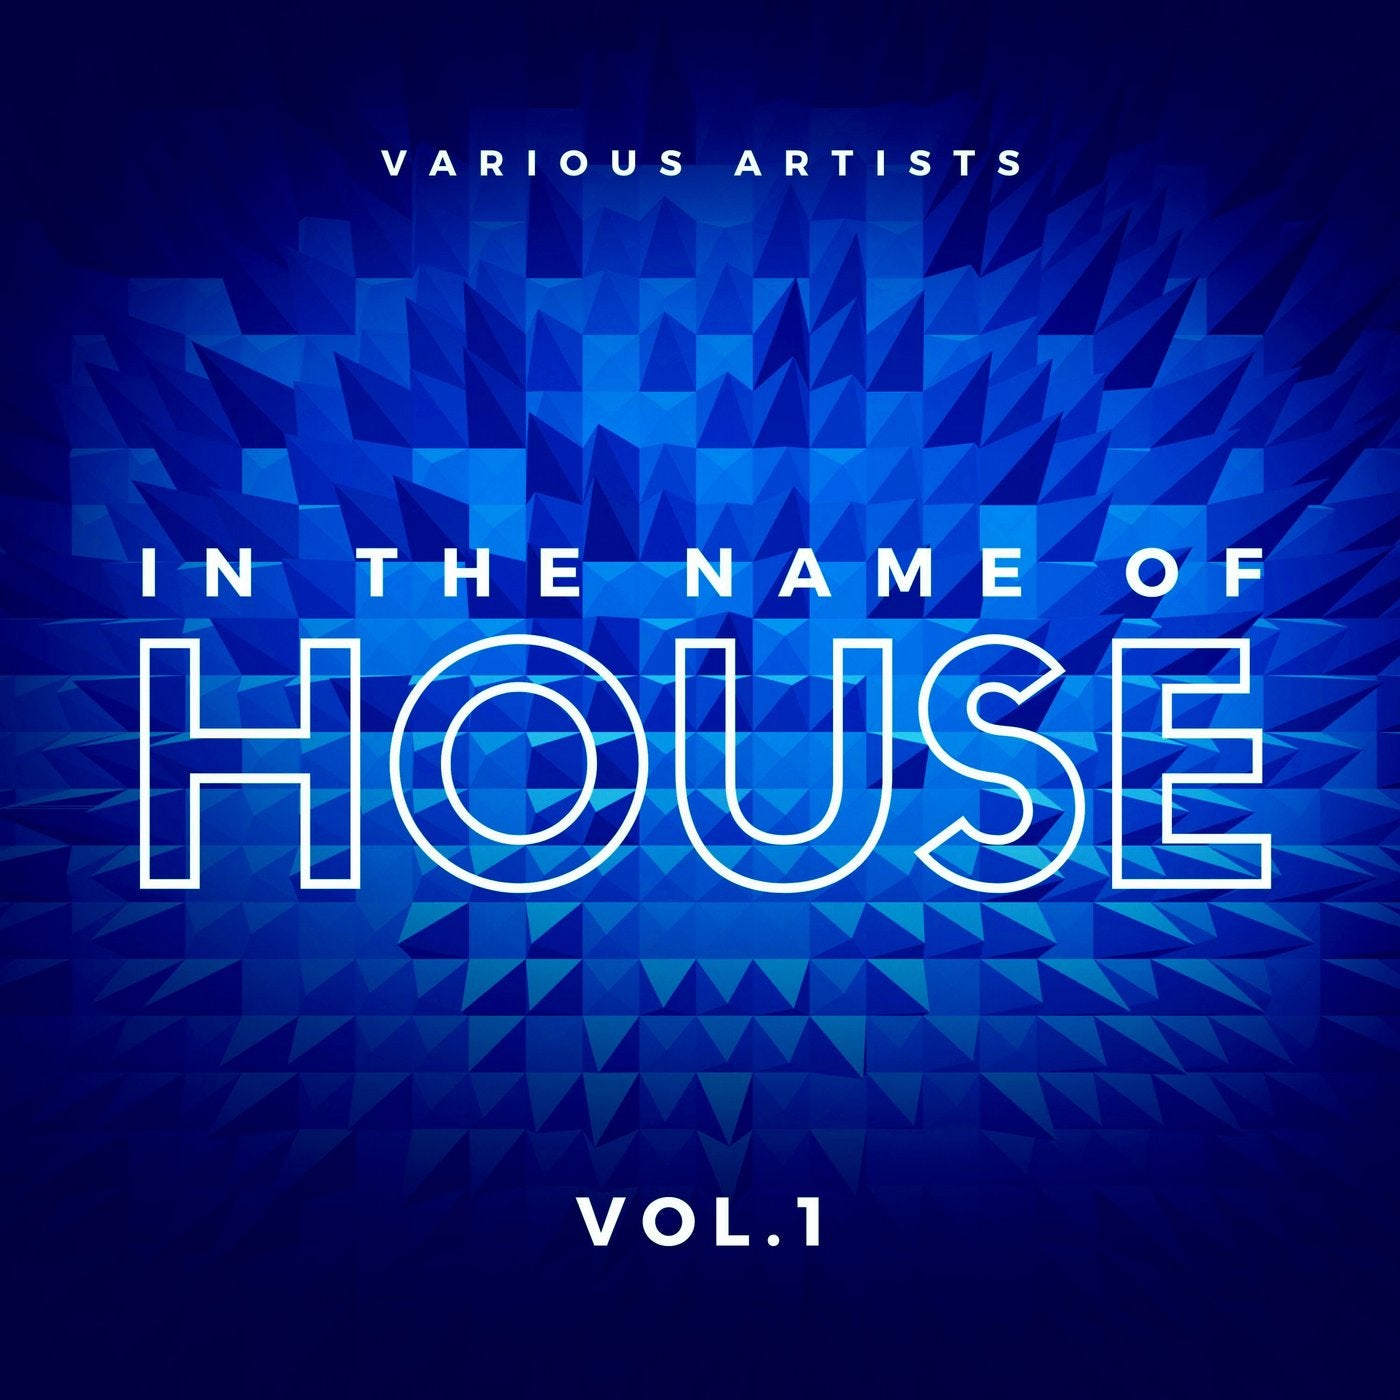 In the Name of House, Vol. 1